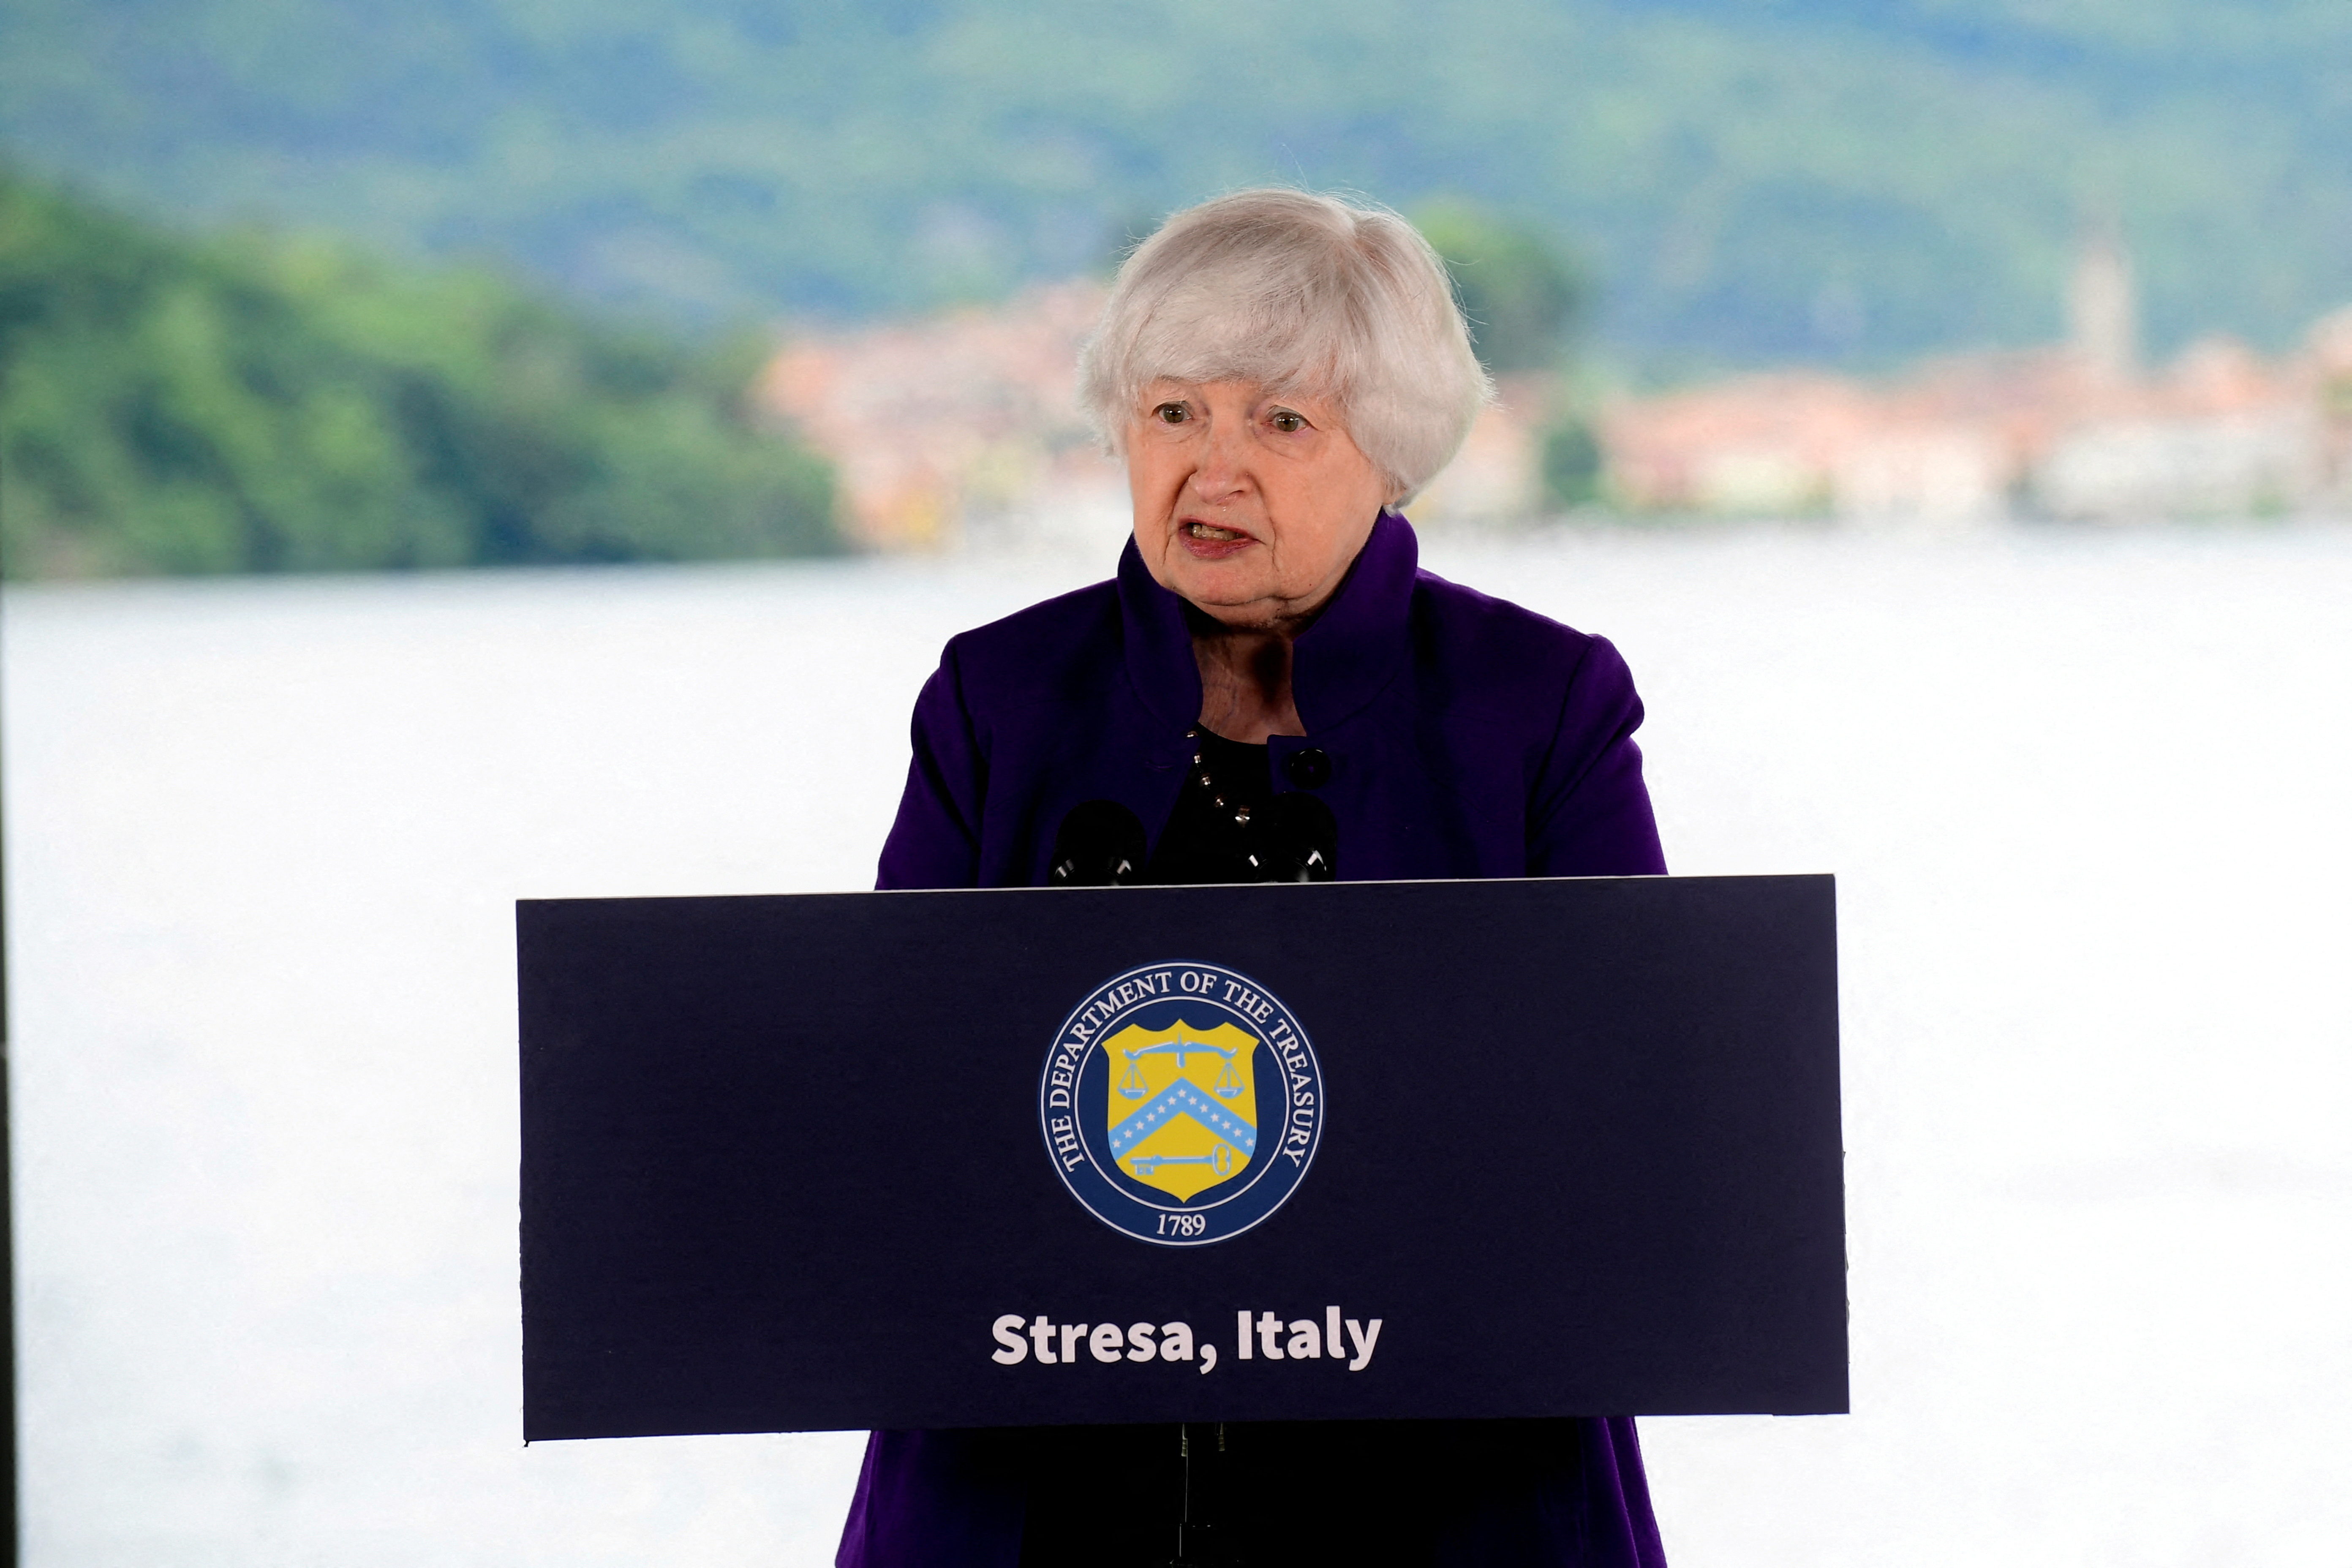 G7 Finance Minister and Central Bank Governors' Meeting in Stresa